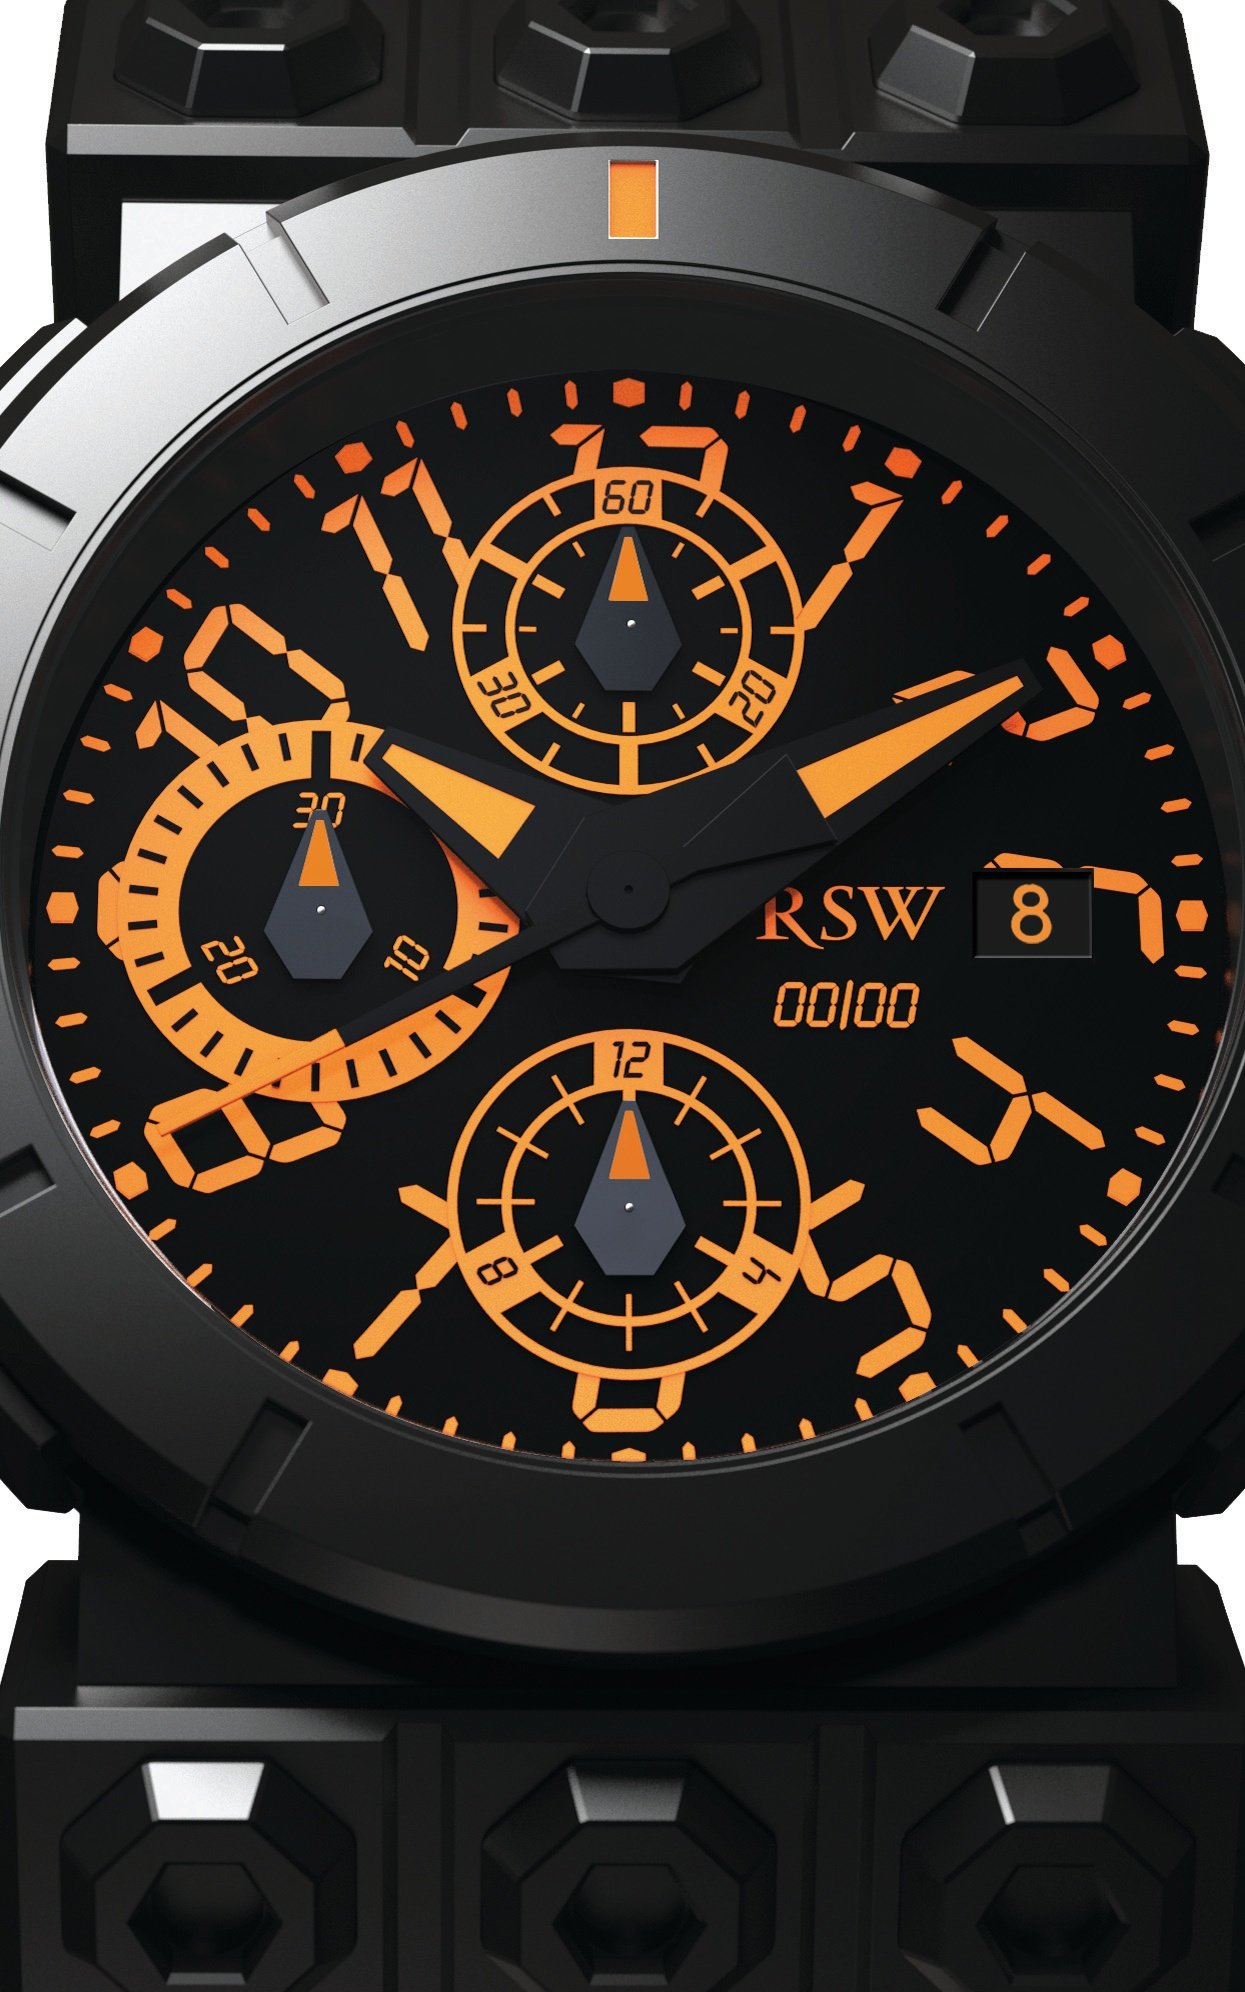 RSW Diving Tool Camo Limited Edition Makes Big Splash at Baselworld 2012 –  Gevril